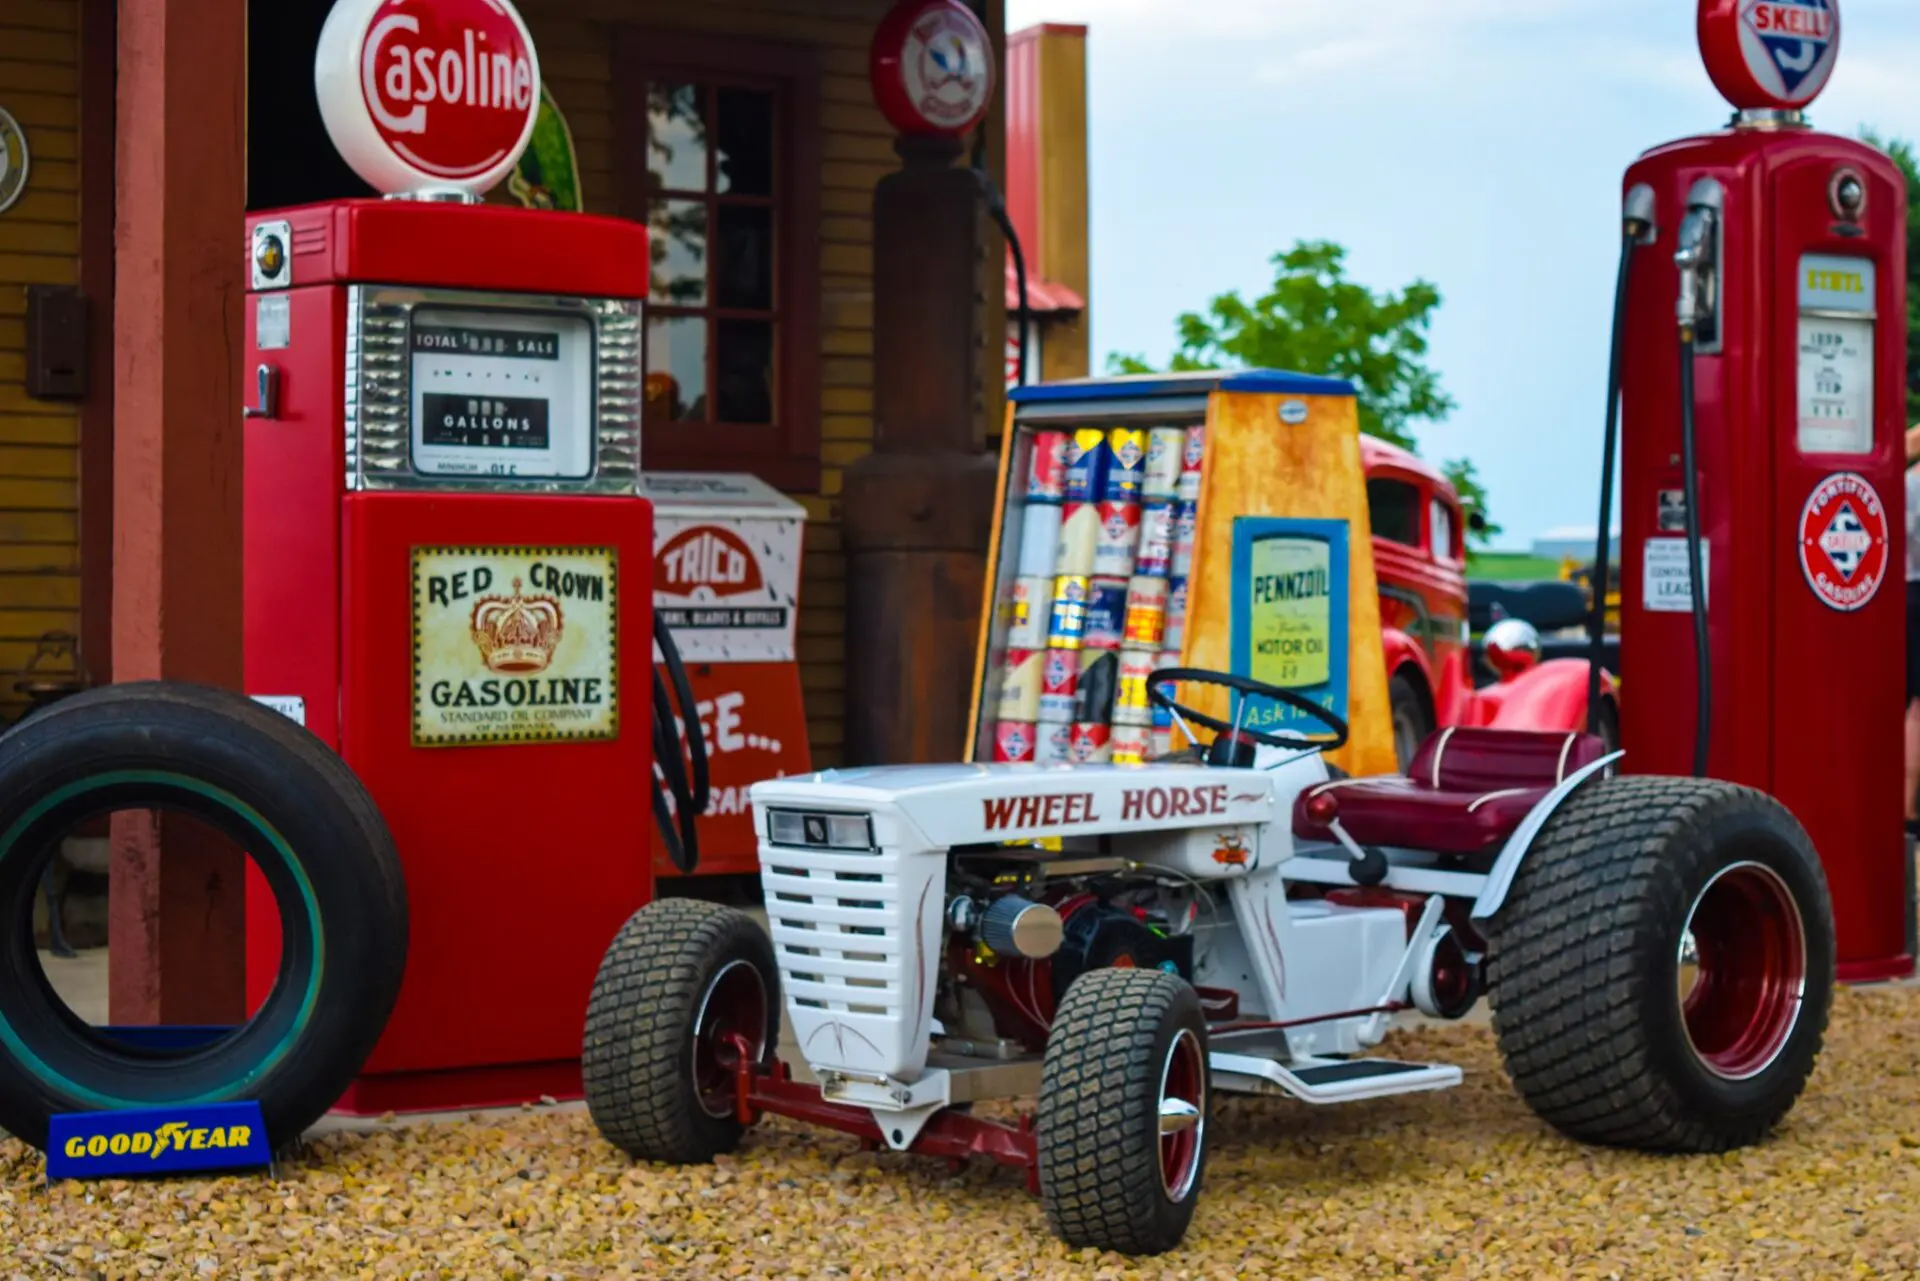 A tractor parked in front of a gas station.